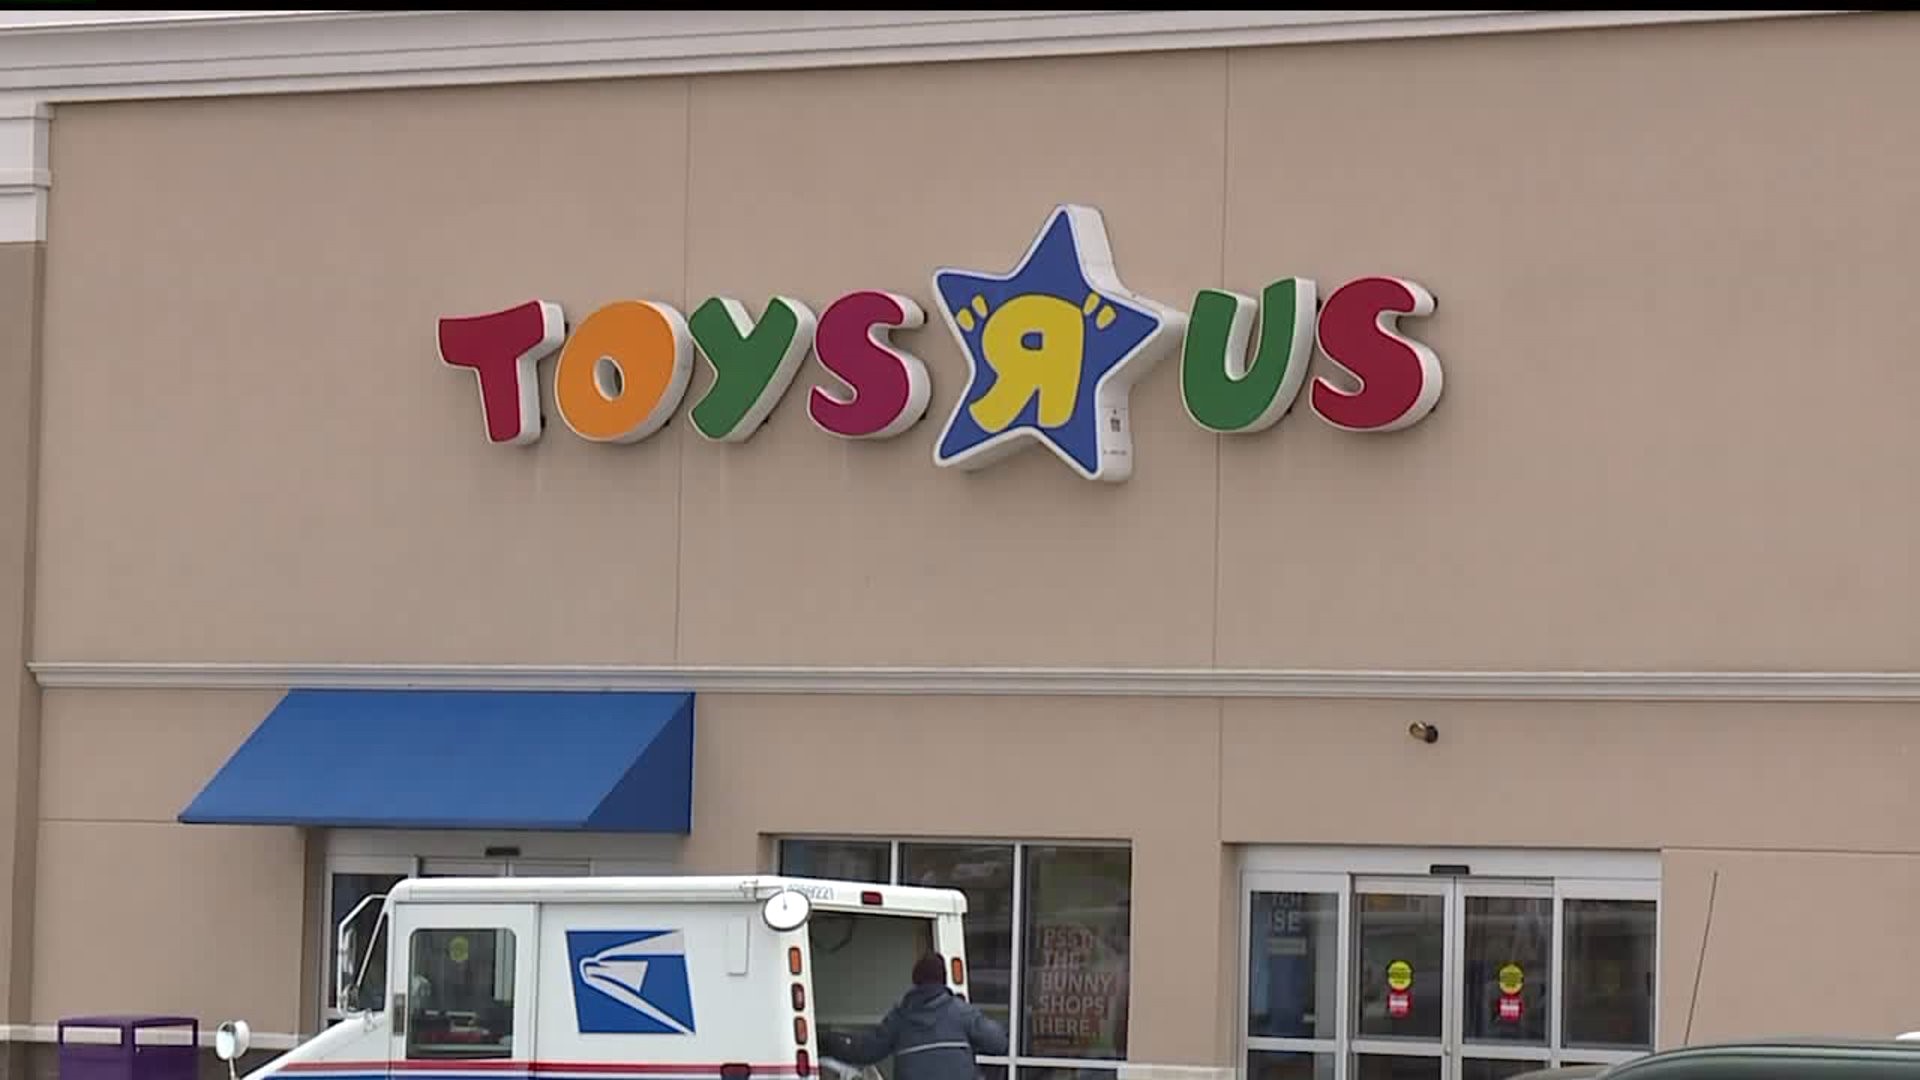 Toys-R-Us liquidation rumors concern local Toys For Tots Foundation